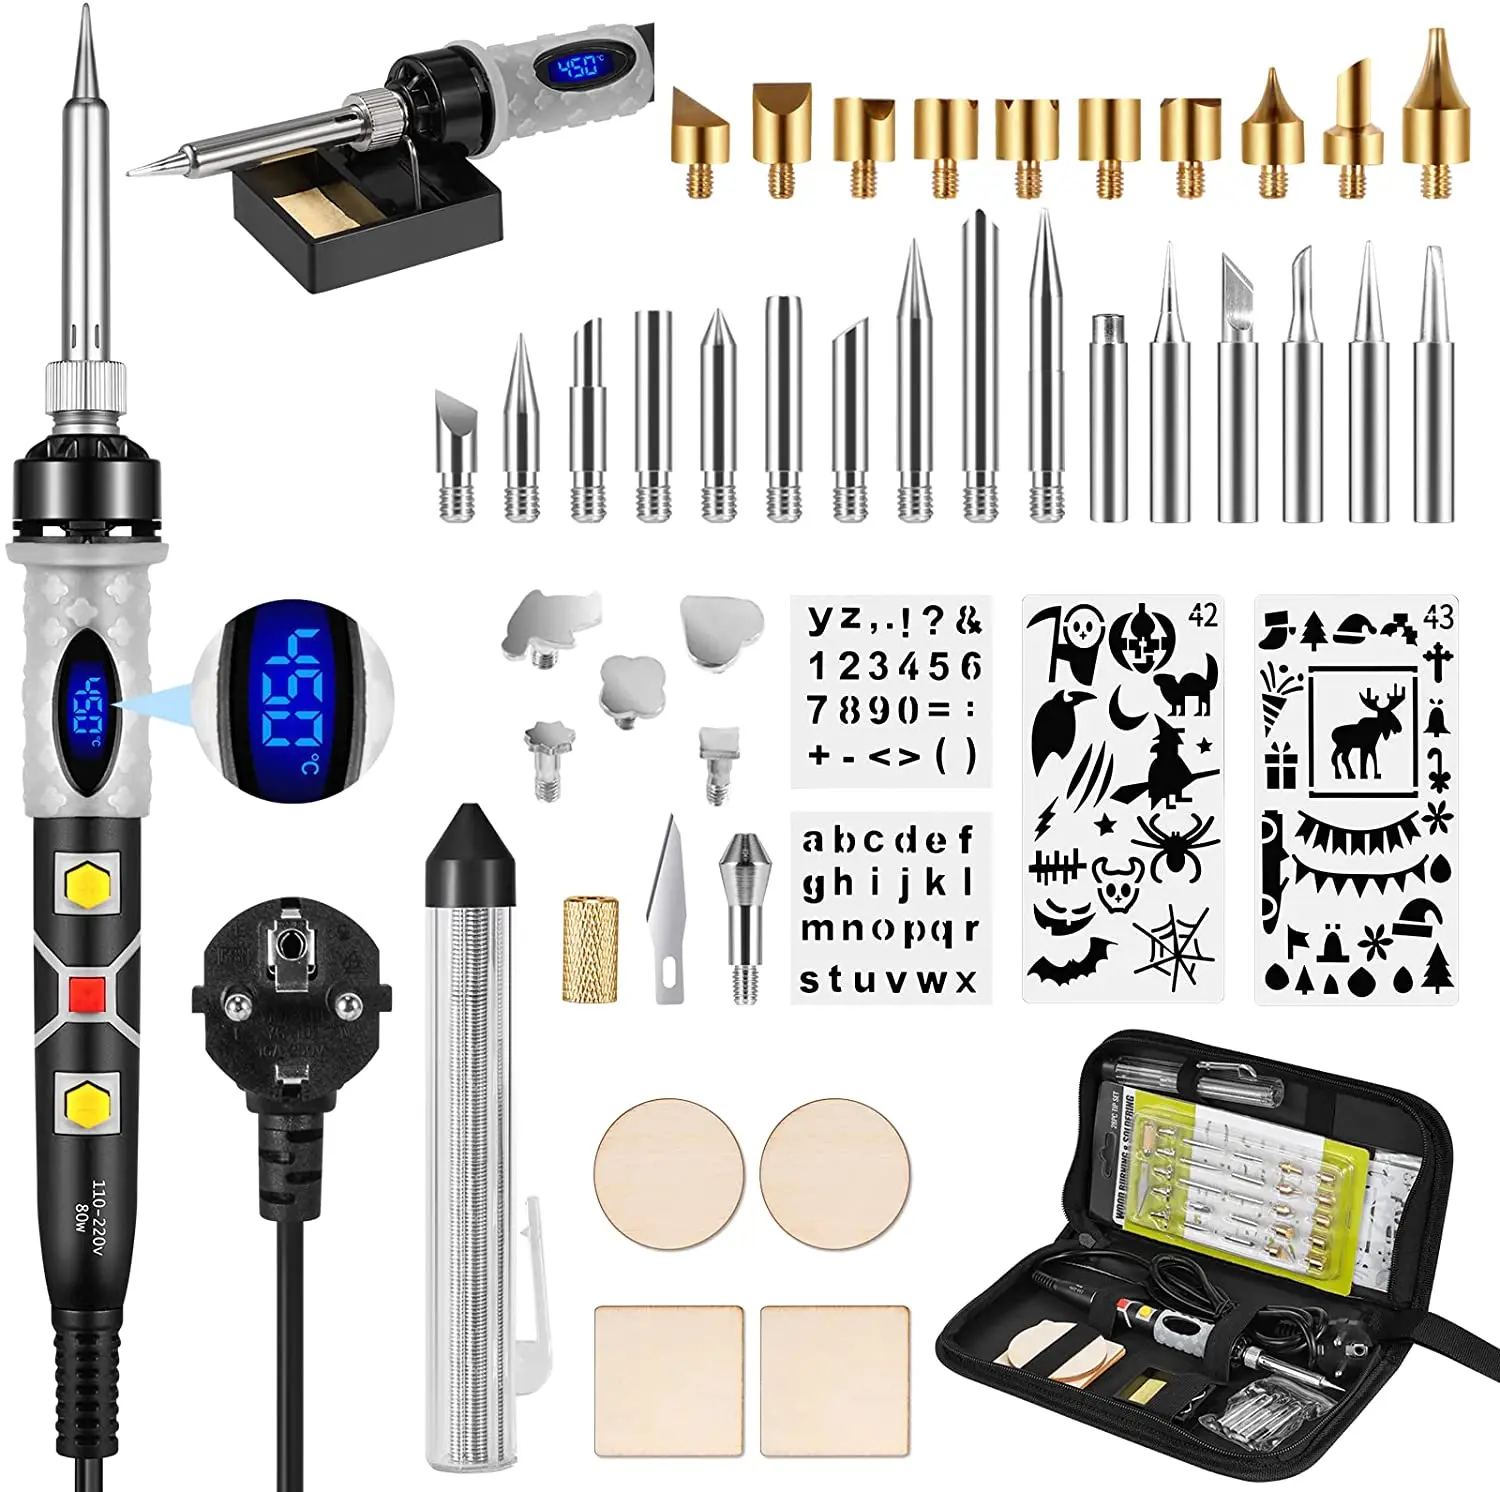 SHHONG 45 IN 1Solder Iron 80W Upgraved Pyrography Soldering Set Temperature  Adjustable for Cork Leather Engraving Wood Carving